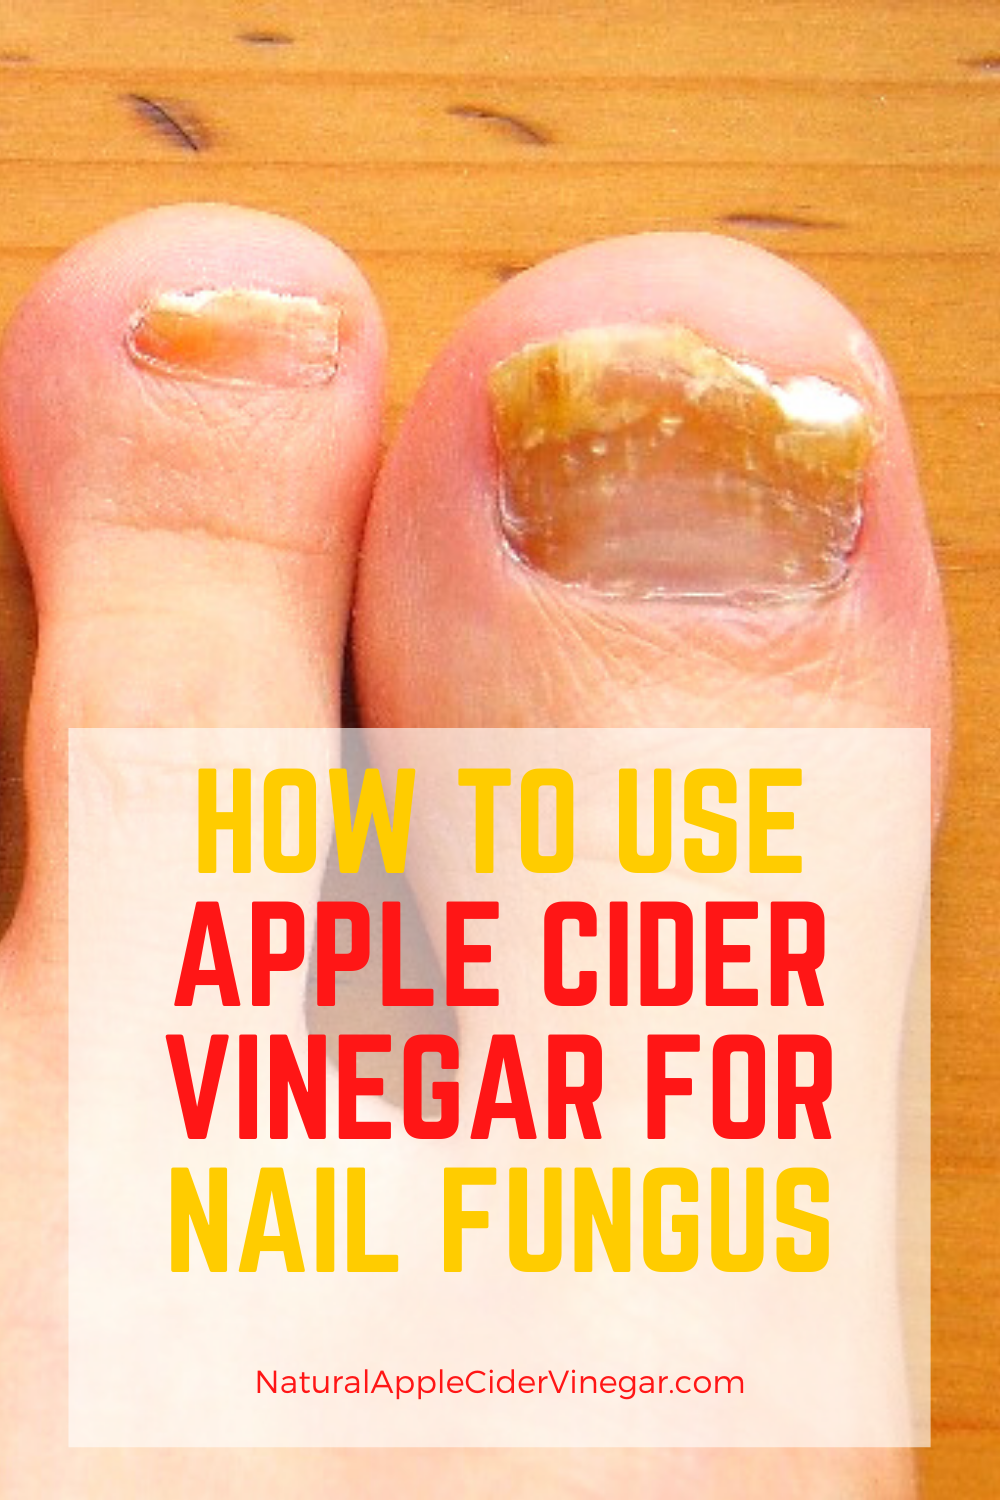 How to Use Apple Cider Vinegar for Nail Fungus